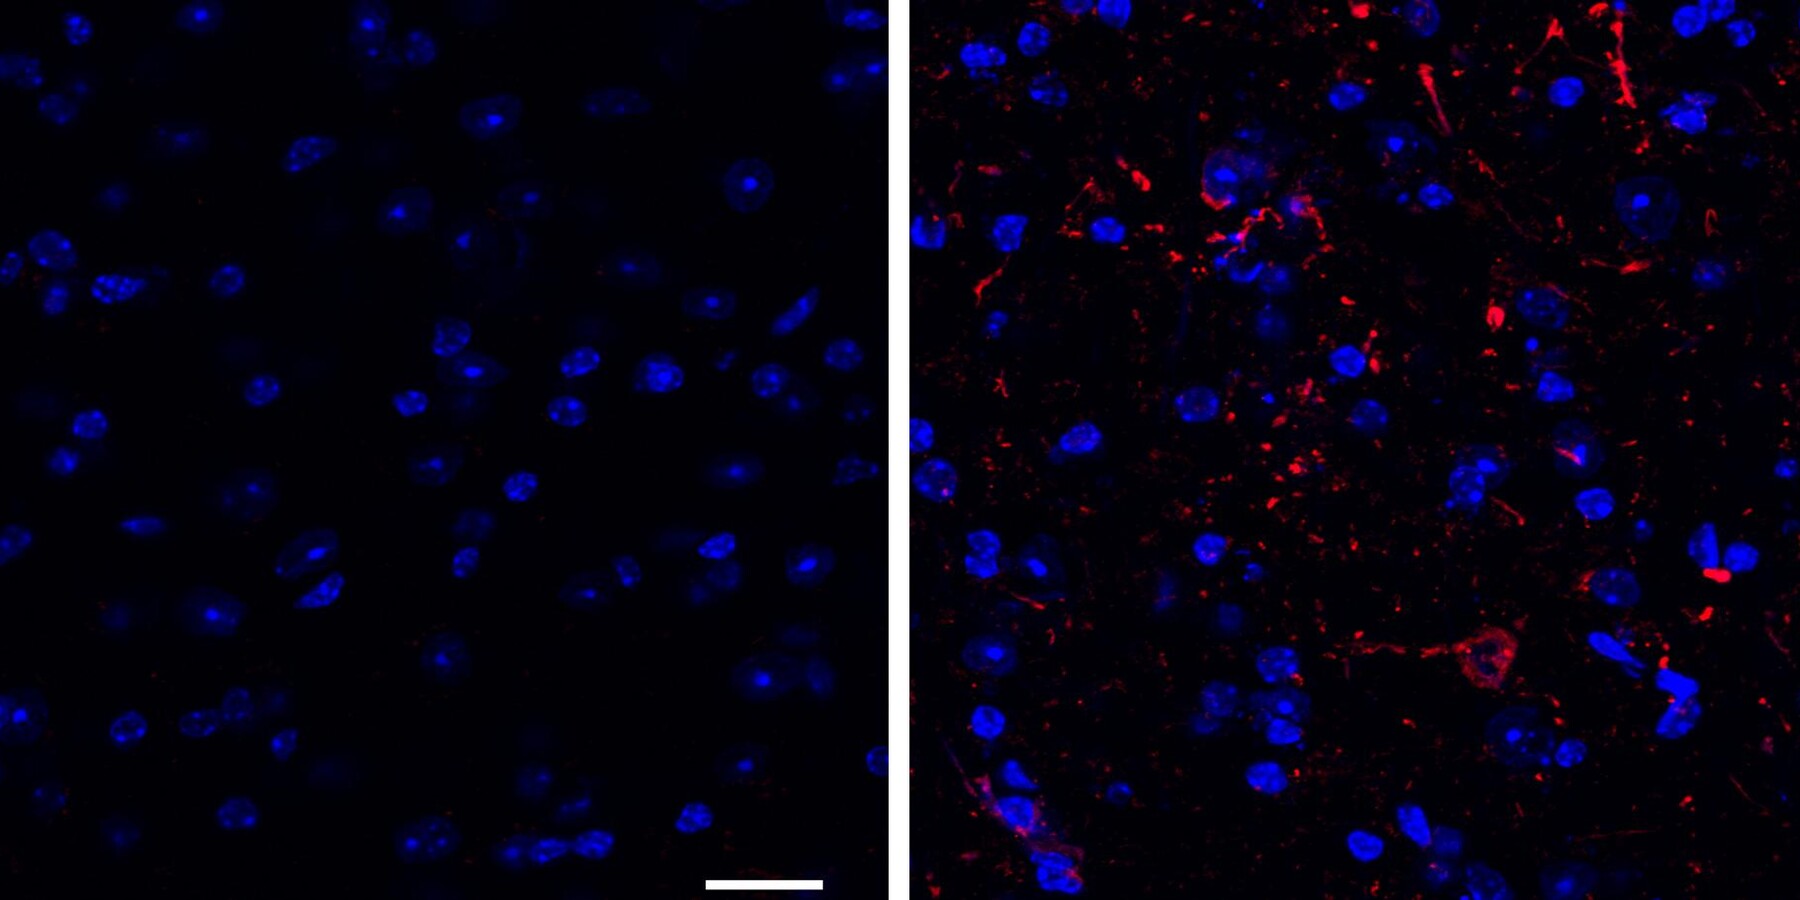 Researchers aimed to prevent buildups of the protein alpha-synuclein (seen in red above) in brain neurons (seen in blue above). Mice that received a therapeutic gene sequence (image on the left) did not accumulate misfolded alpha-synuclein buildups. 